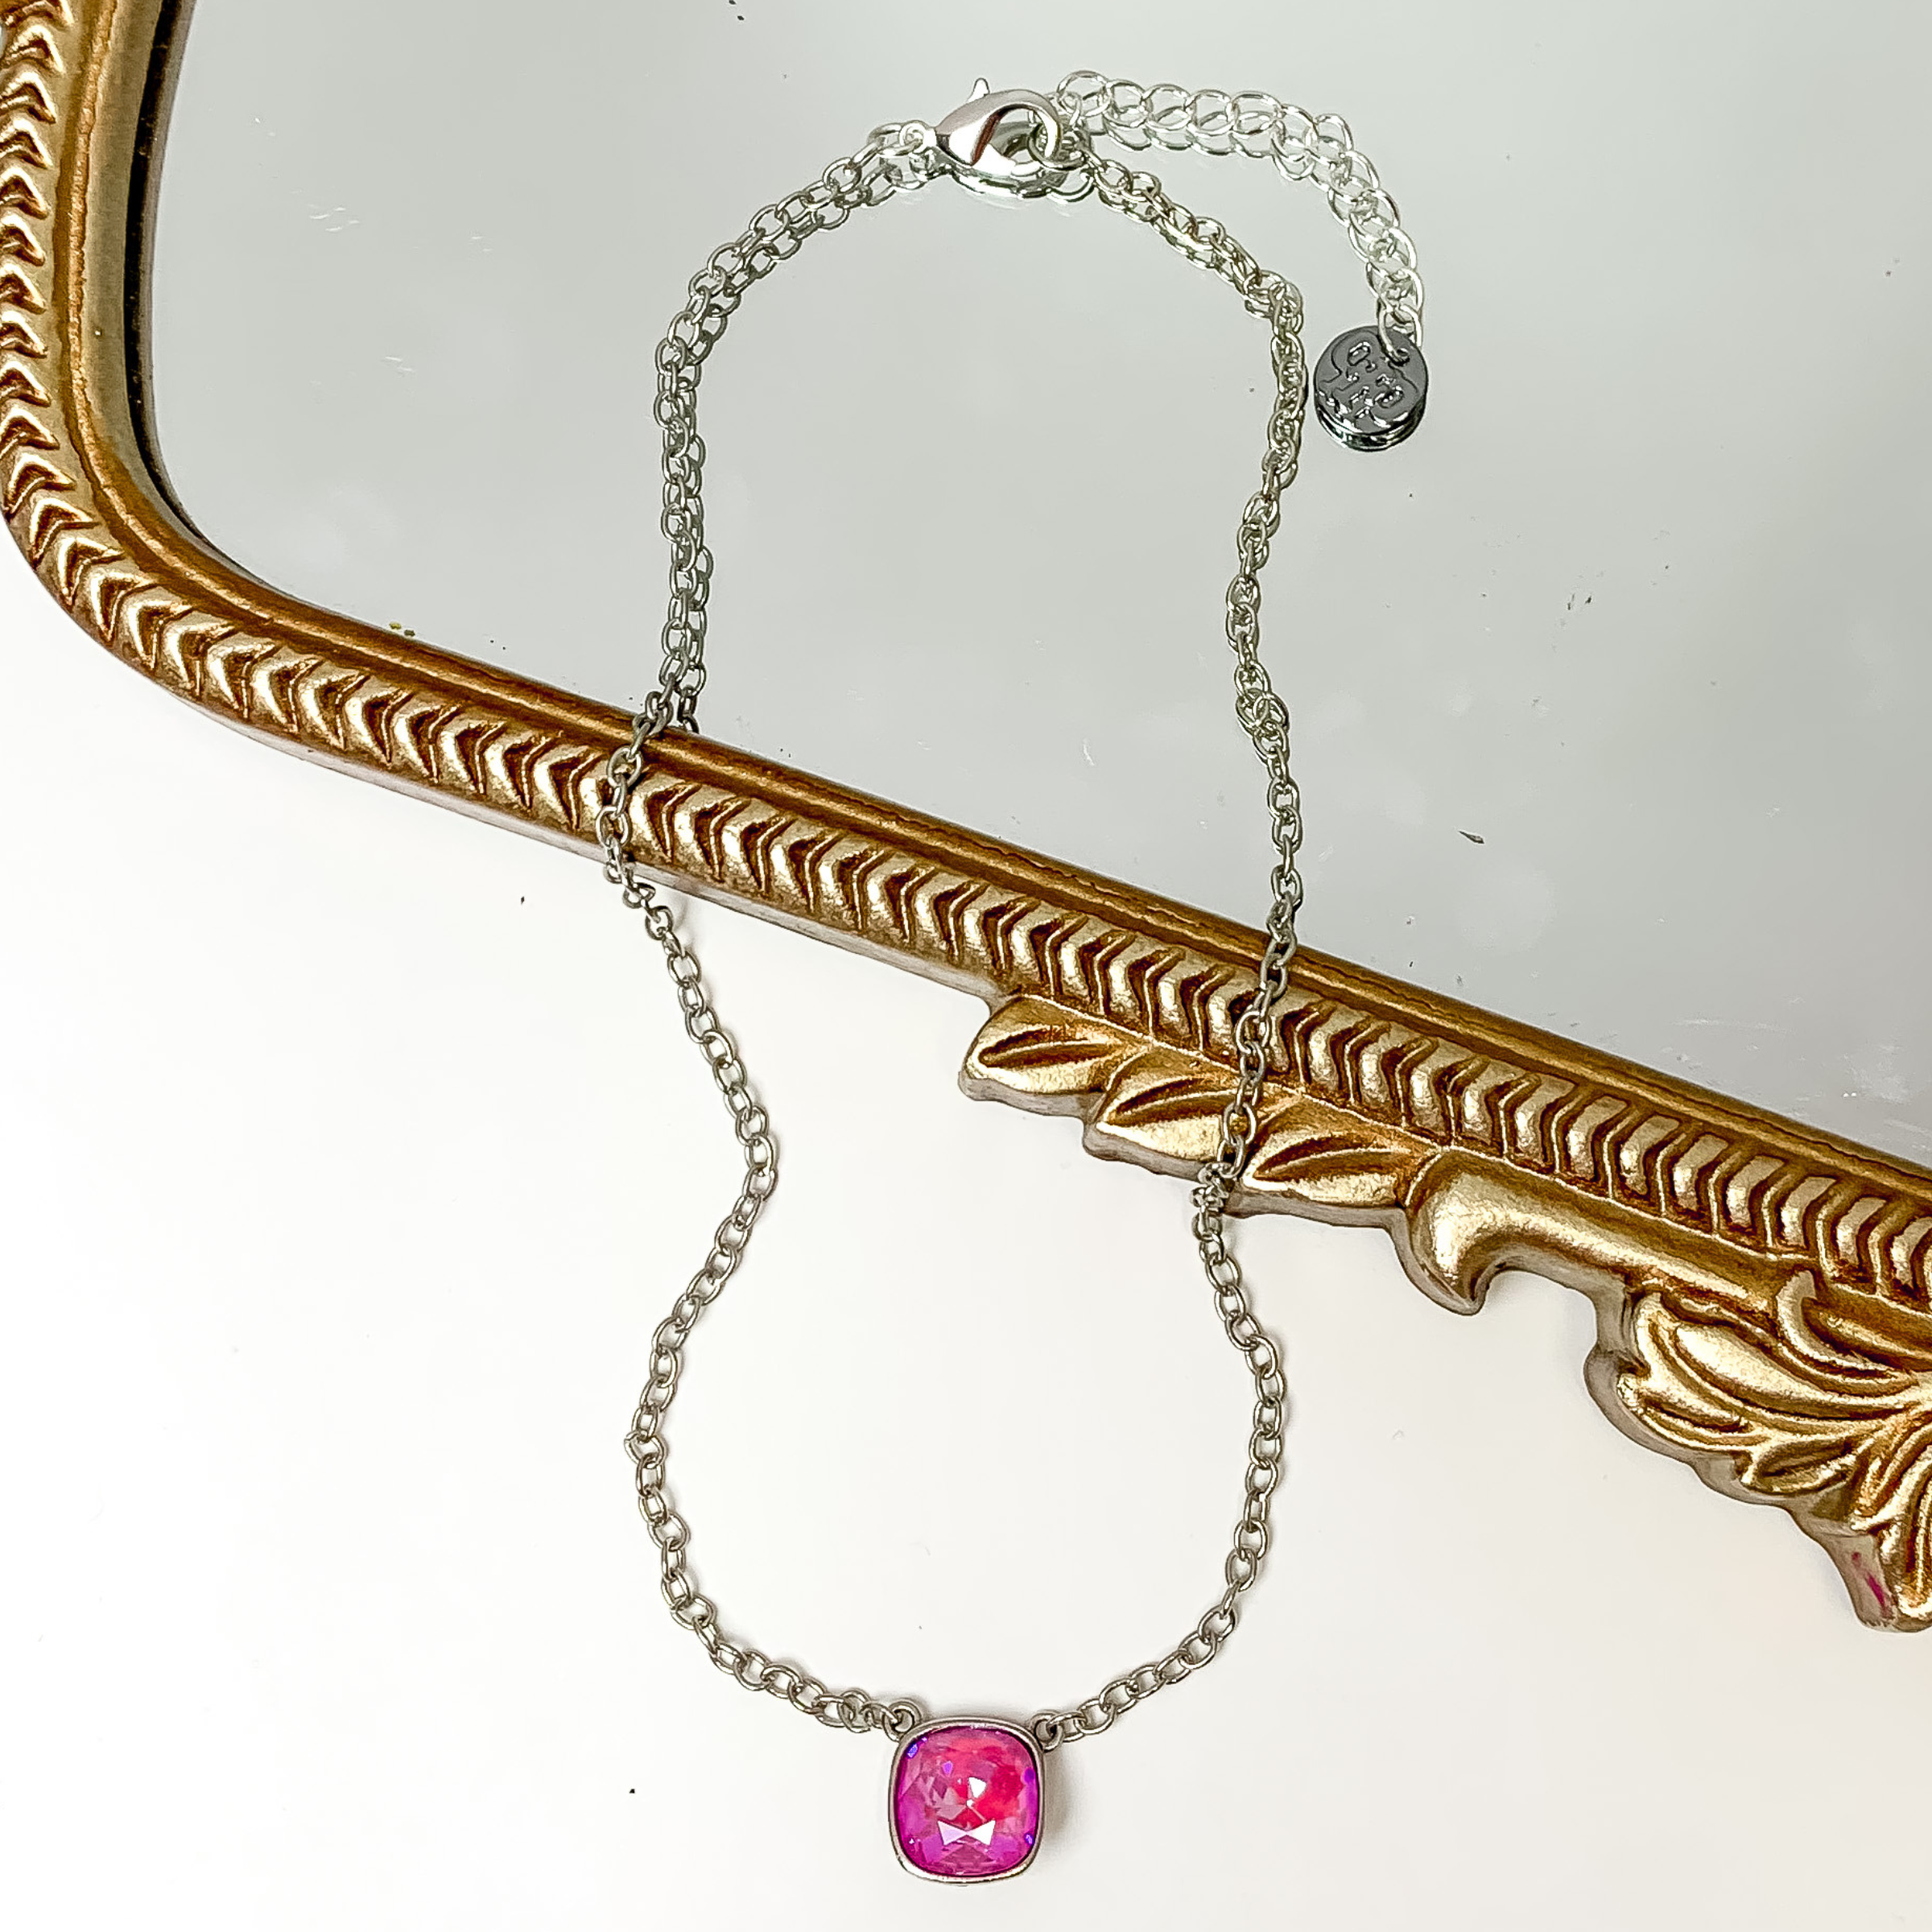 Silver chain necklace with a pink lotus delight cushion cut crystal. This necklace is pictured partially laying on a gold mirror on a white background.